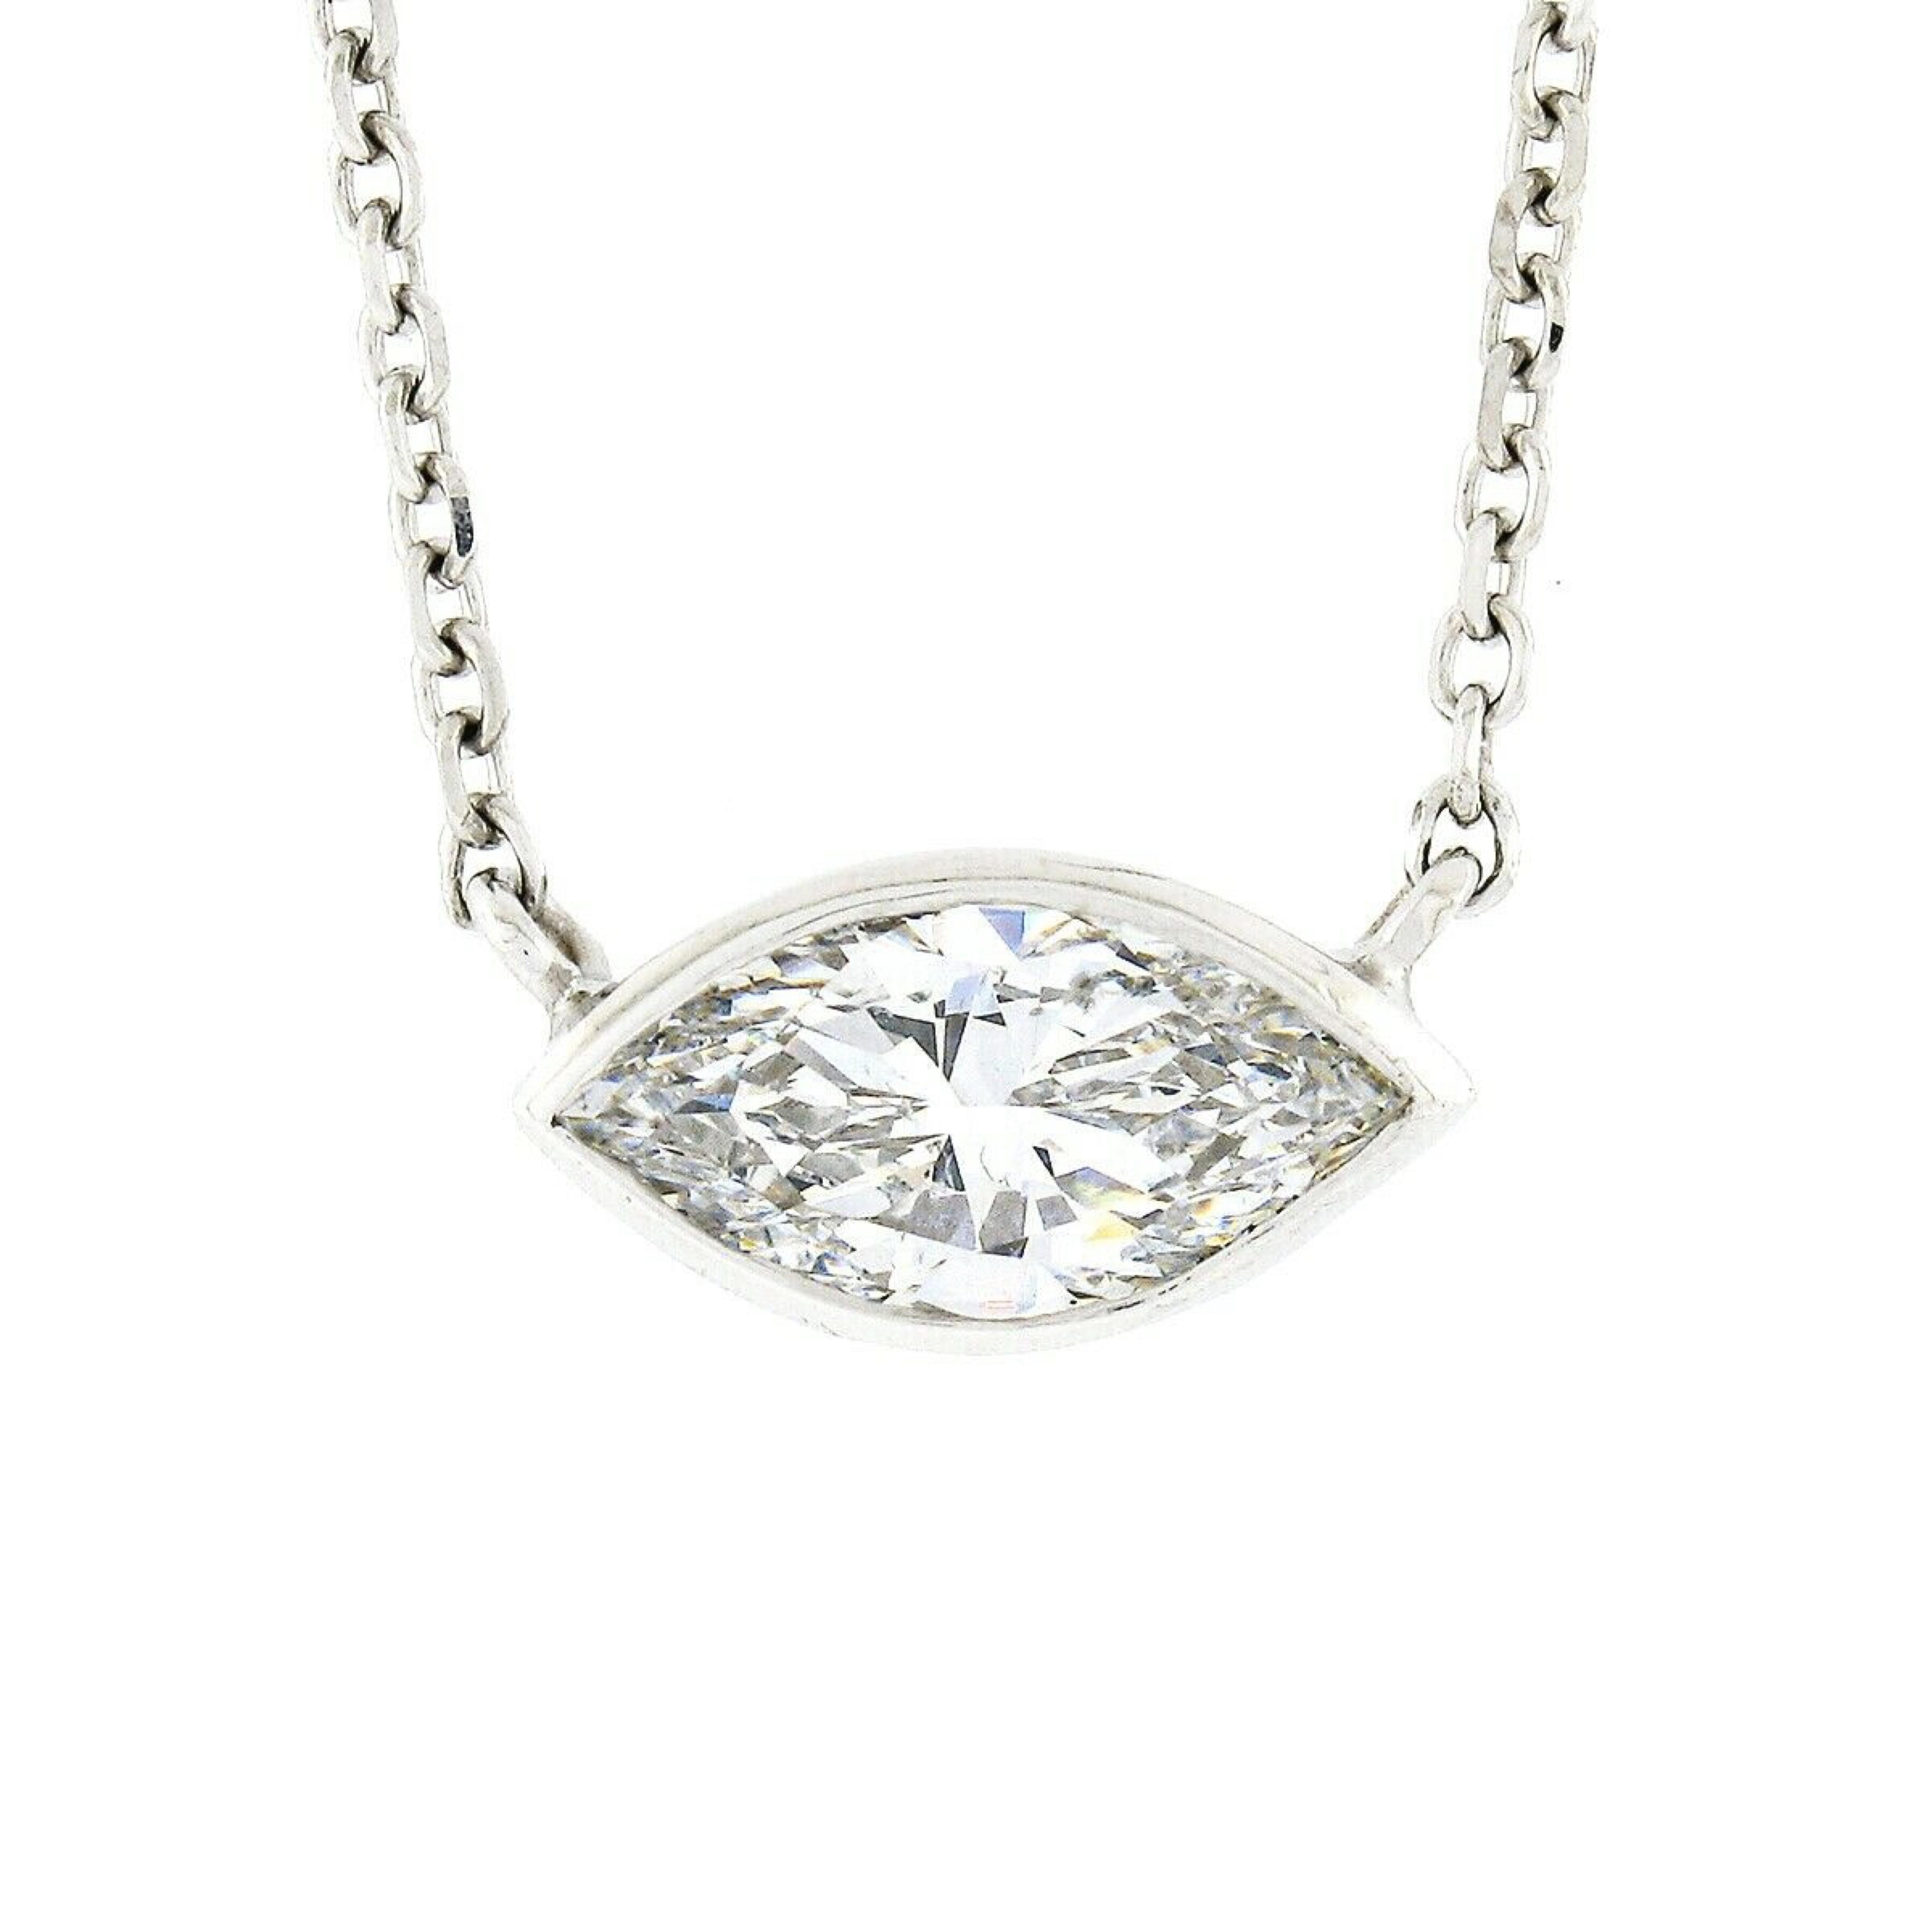 Here we have a gorgeous, brand new, pendant necklace crafted in solid 14k white gold. The necklace features a fine, GIA certified, marquise brilliant cut diamond solitaire neatly bezel set at the center of an adjustable 18.5 or 16.5 inch cable link